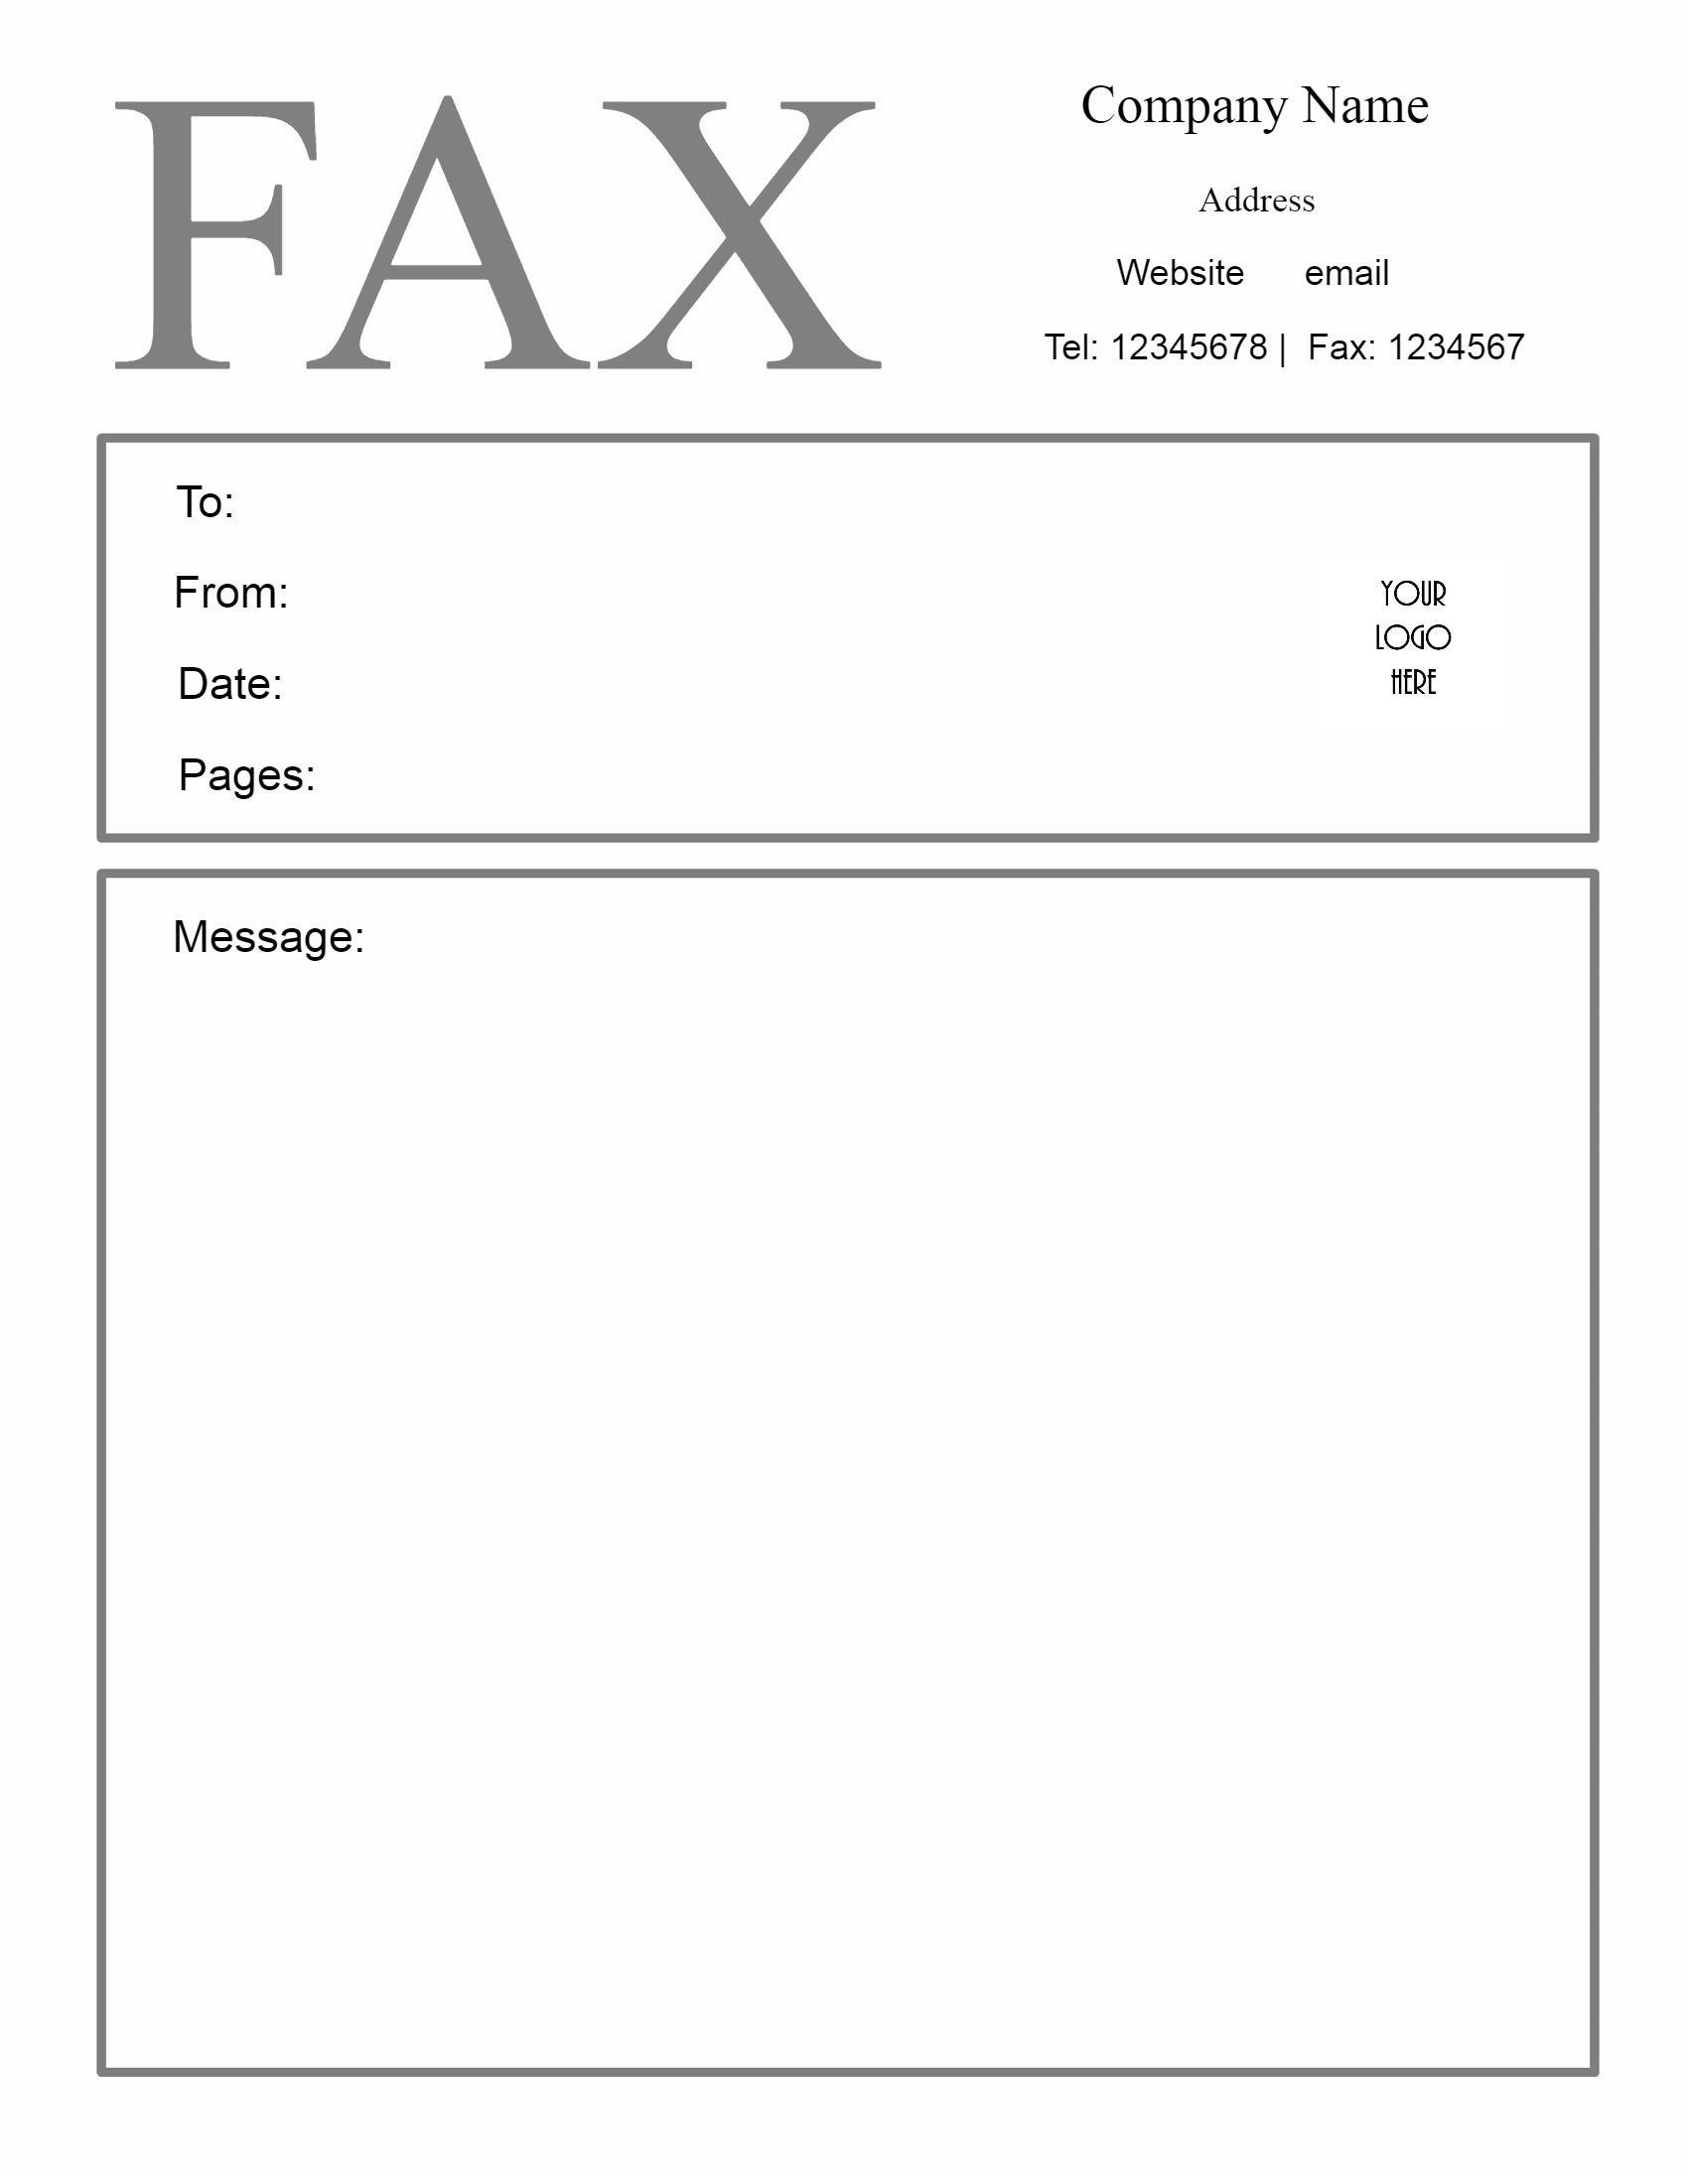 Free Fax Cover Sheet Template | Customize Online Then Print - Free Printable Fax Cover Sheet